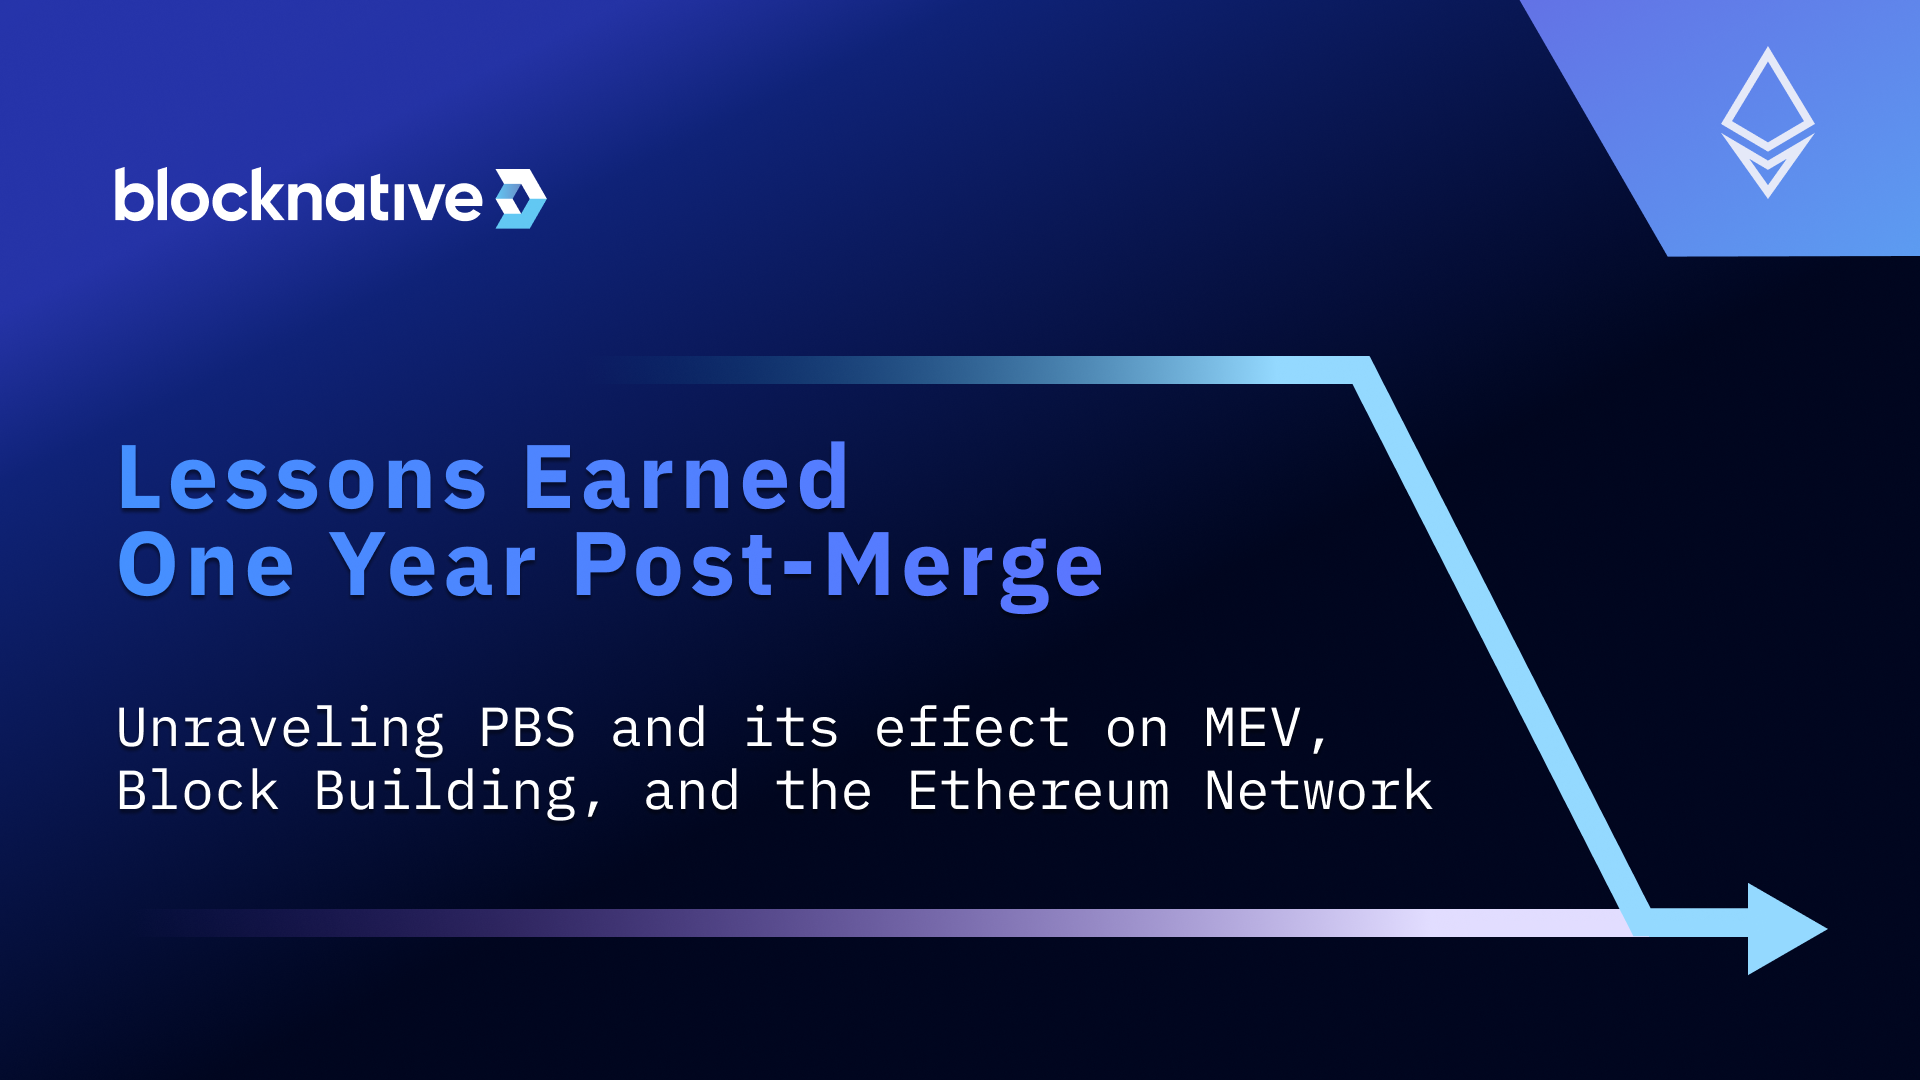 Lessons Earned One Year Post-Merge: Unraveling PBS and its effect on MEV, Block Building, and the Ethereum Network